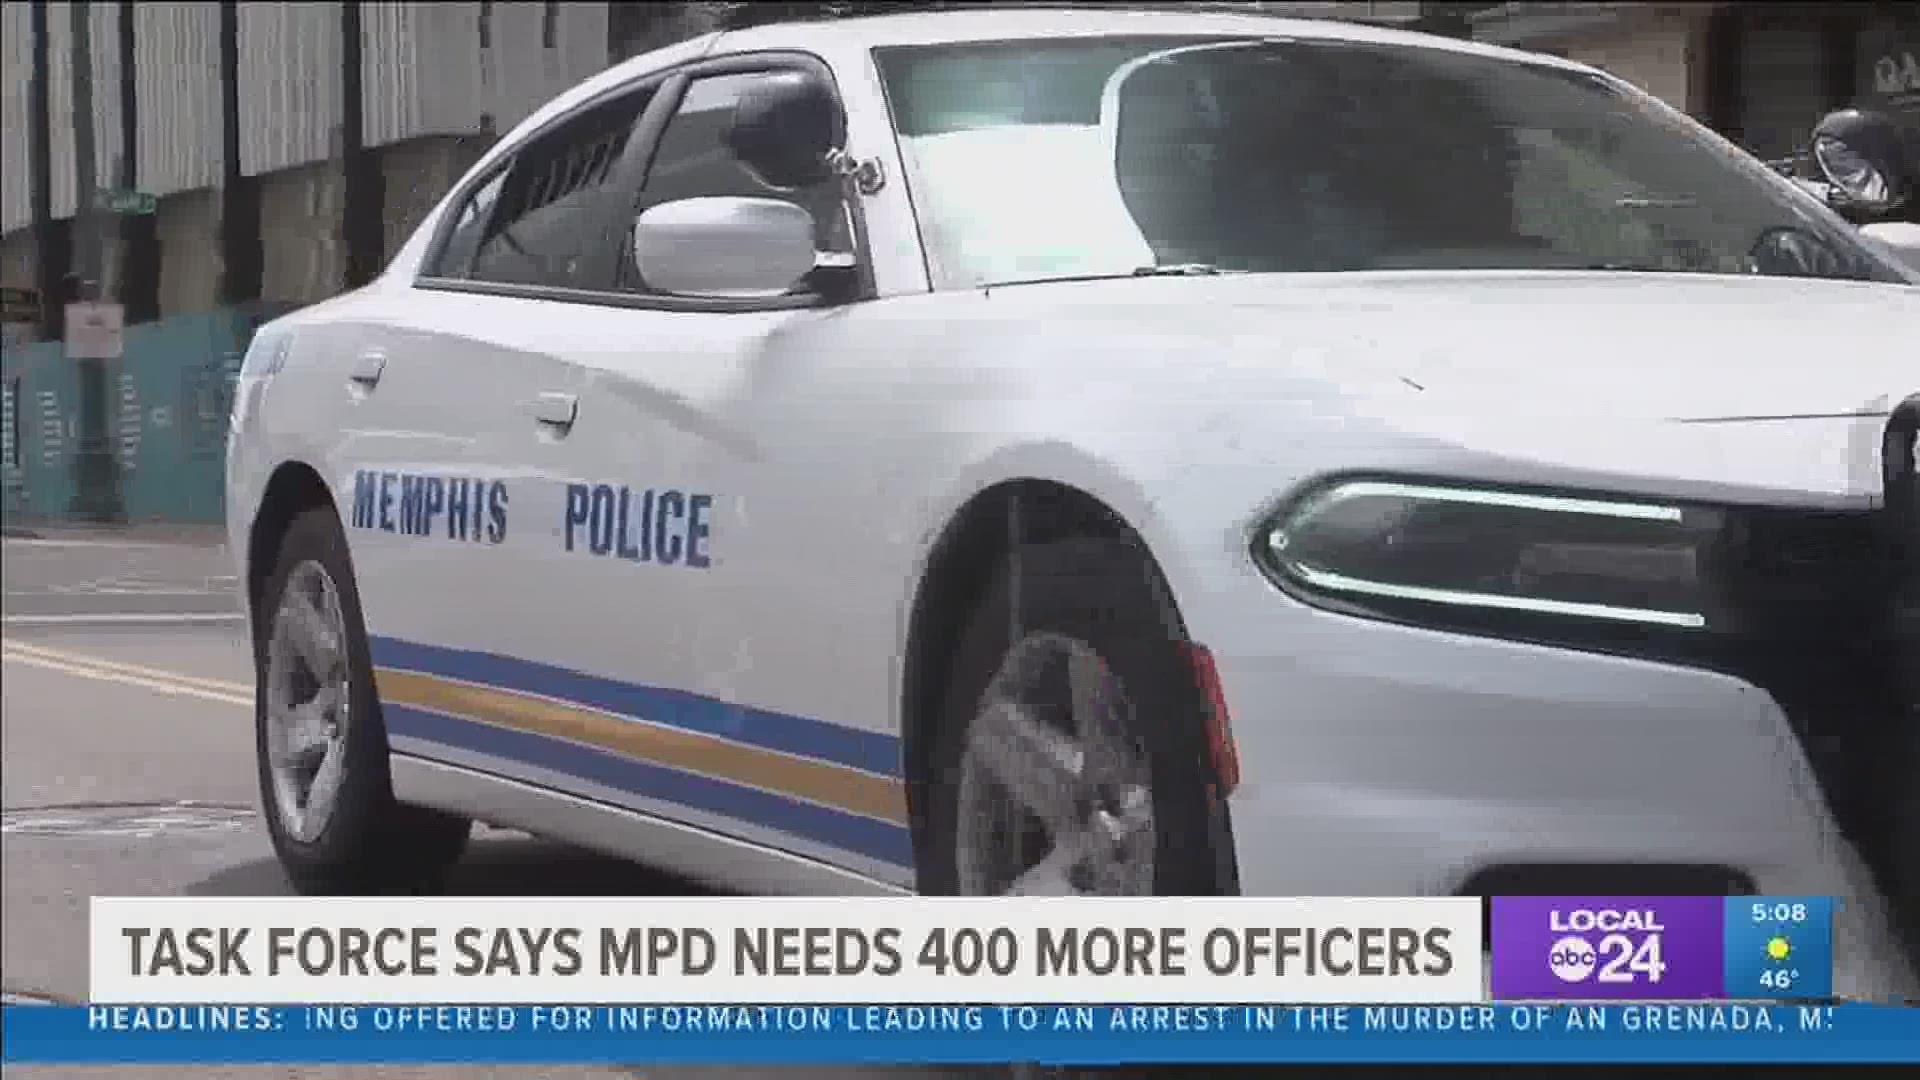 The chairman of the Public Safety Task Force said 2,500 is the number the task force agreed upon as they considered "reimagining policing."